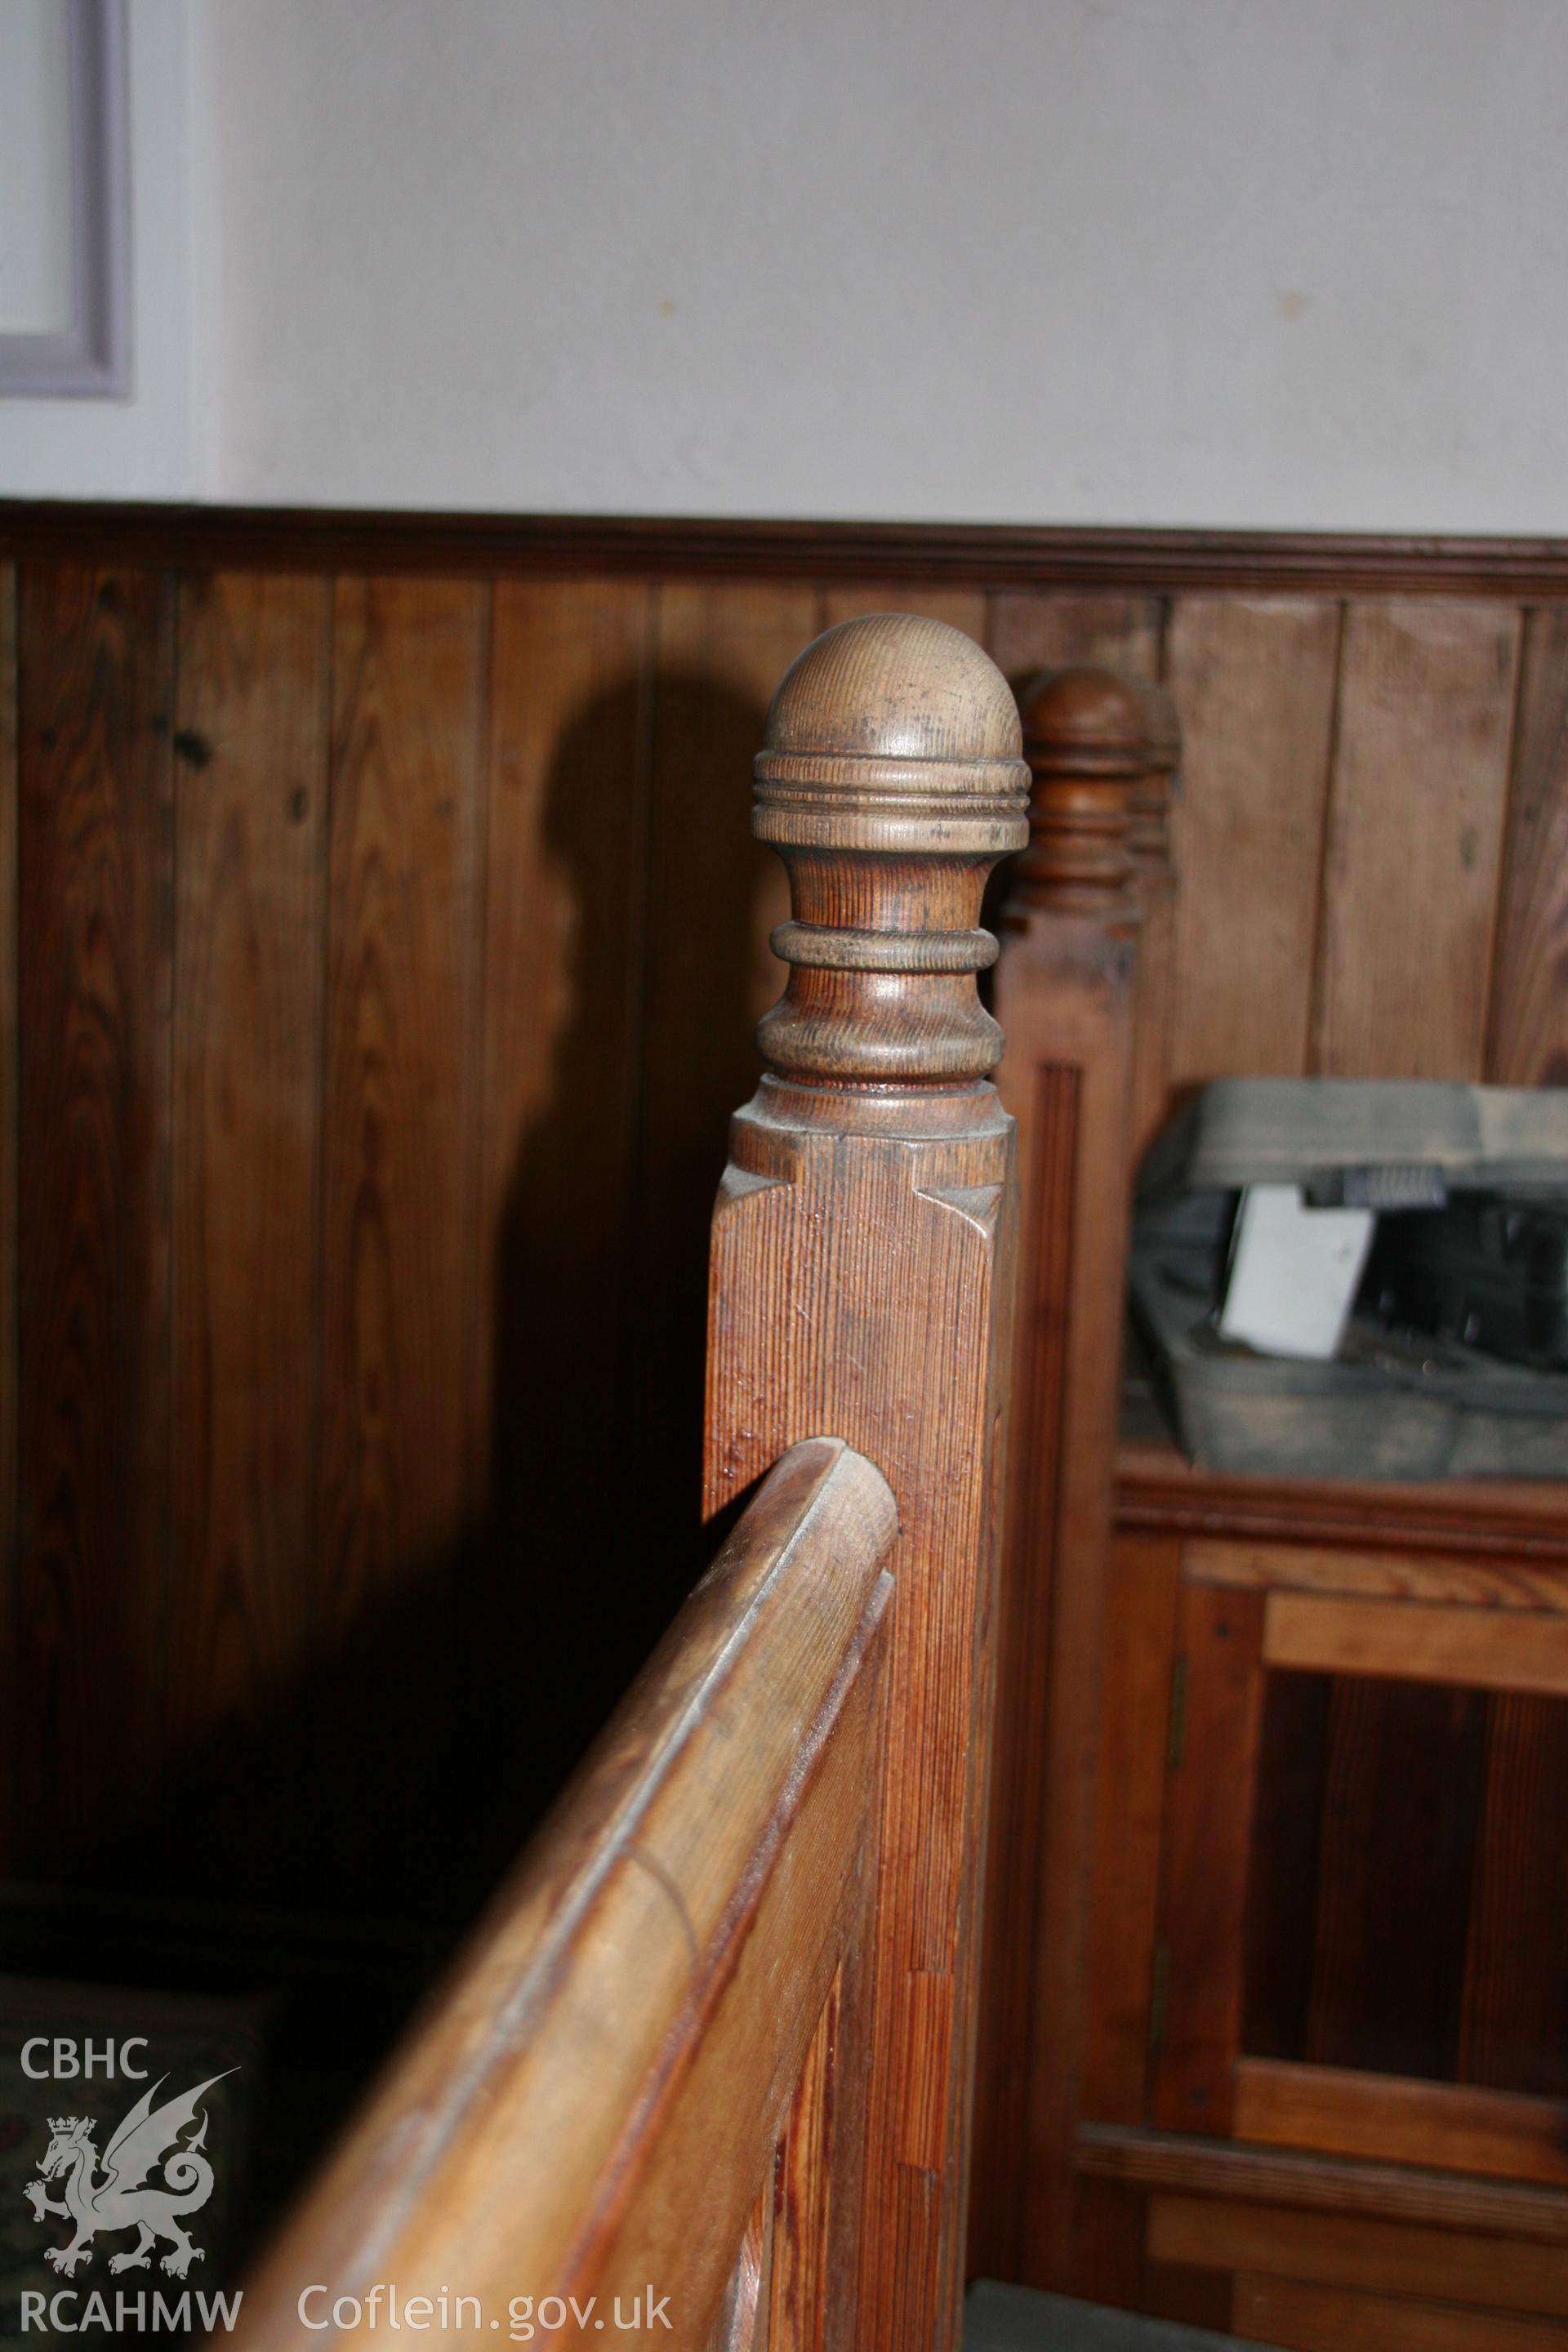 Photograph showing detailed view of wooden pew and panelling at the former Llawrybettws Welsh Calvinistic Methodist chapel, Glanyrafon, Corwen. Produced by Tim Allen on 7th March 2019 to meet a condition attached to planning application.